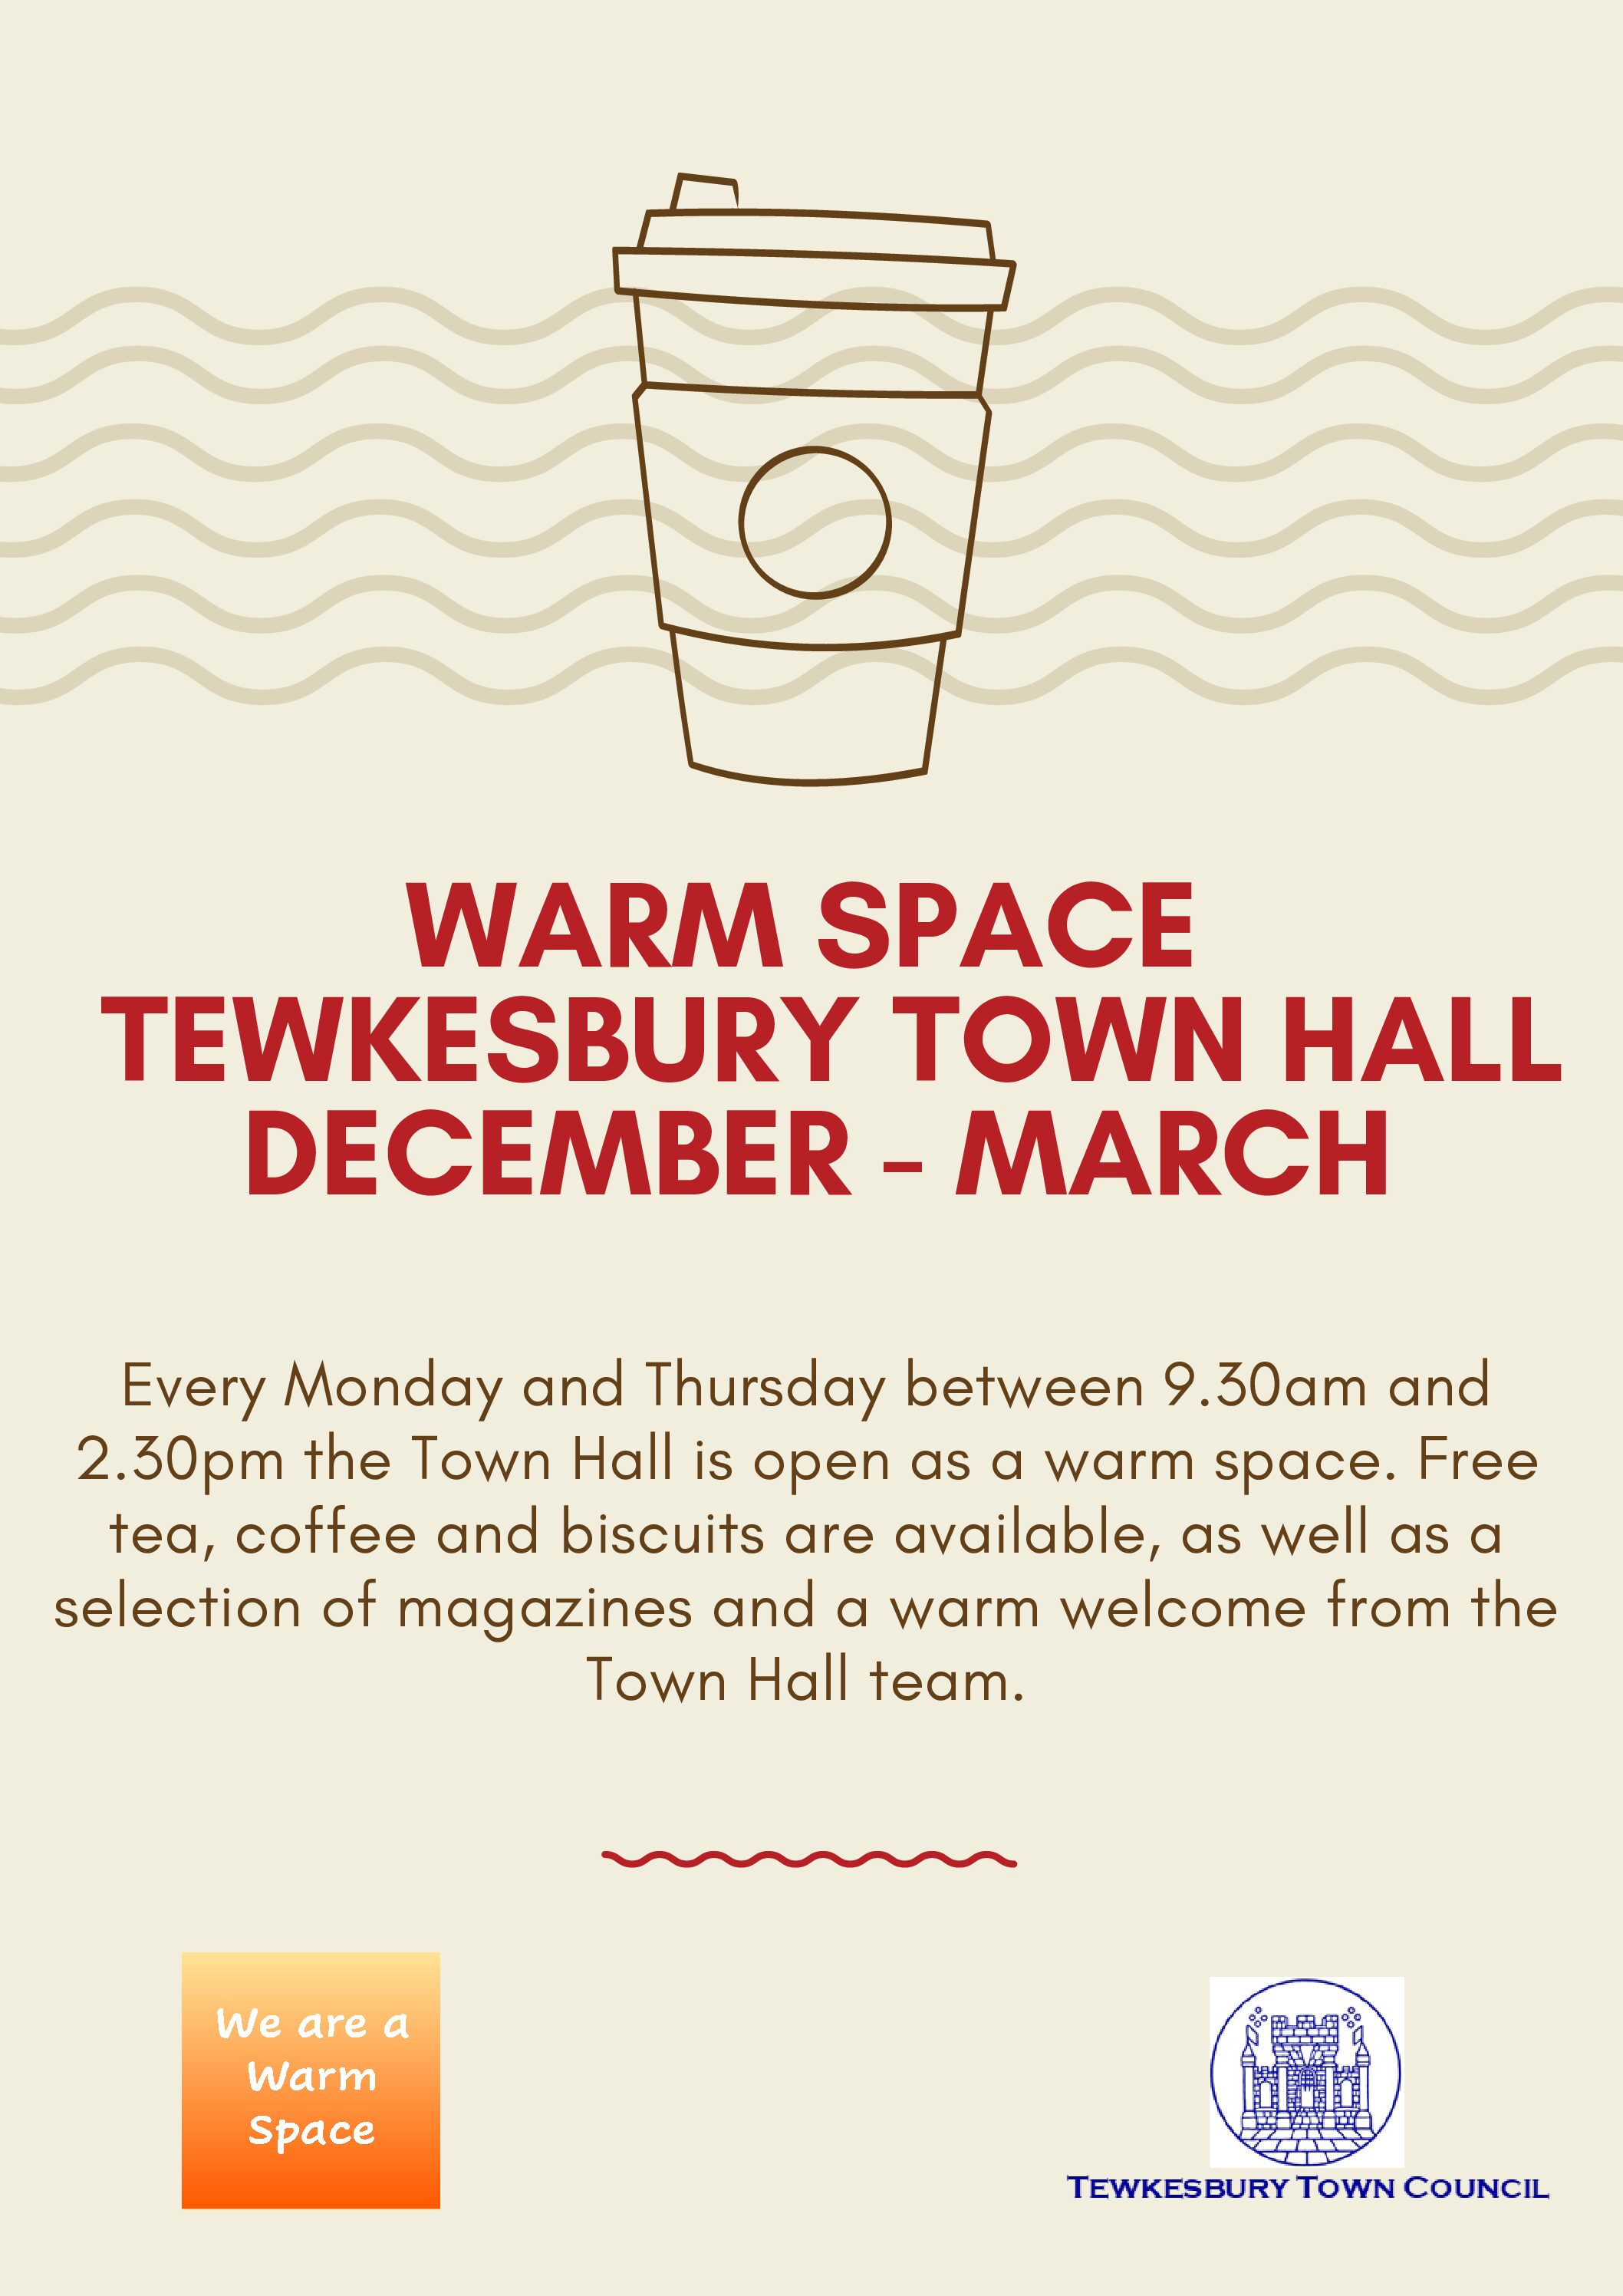 Tewkesbury Town Hall: A Warm Space December – March